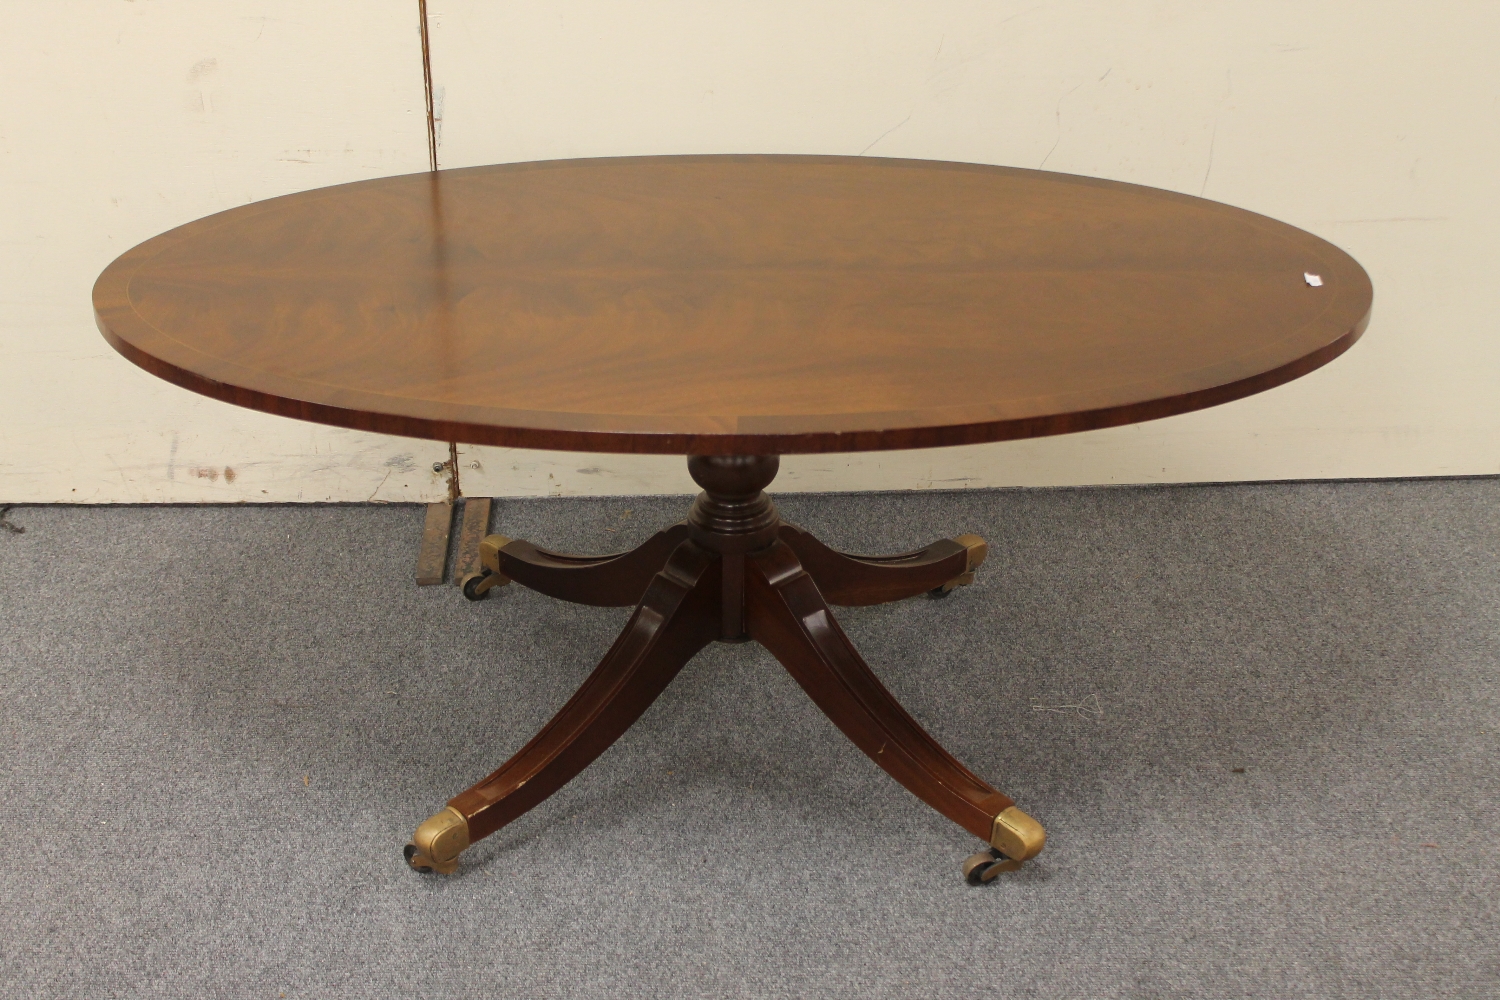 A reproduction oval pedestal coffee table